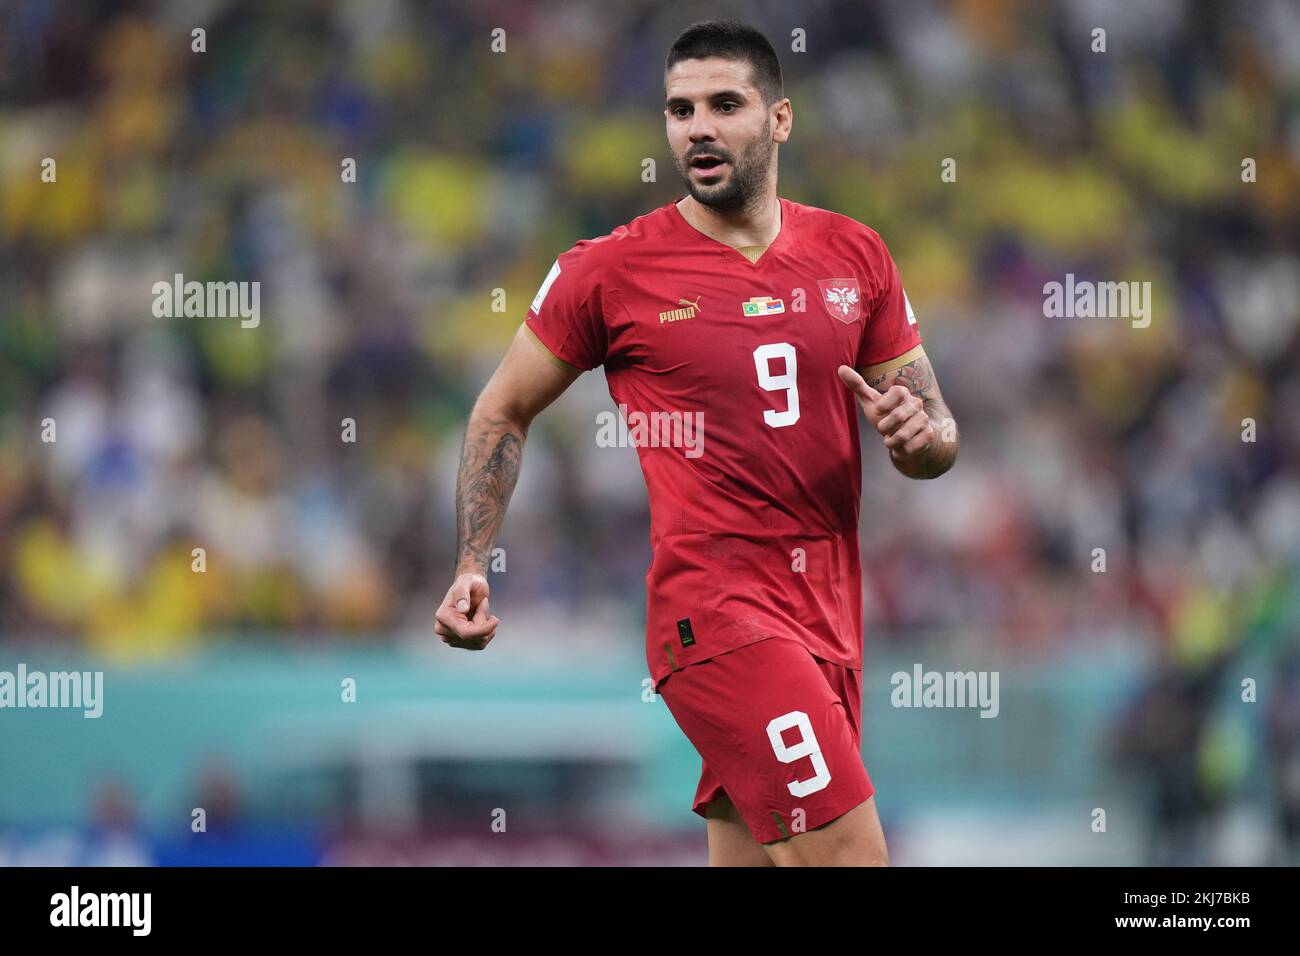 Aleksandar Mitrovic of Serbia during the FIFA World Cup Qatar 2022 match, Group G, between Brazil and Serbia played at Lusail Stadium on Nov 24, 2022 in Lusail, Qatar. (Photo by Bagu Blanco / PRESSIN) Credit: PRESSINPHOTO SPORTS AGENCY/Alamy Live News Stock Photo